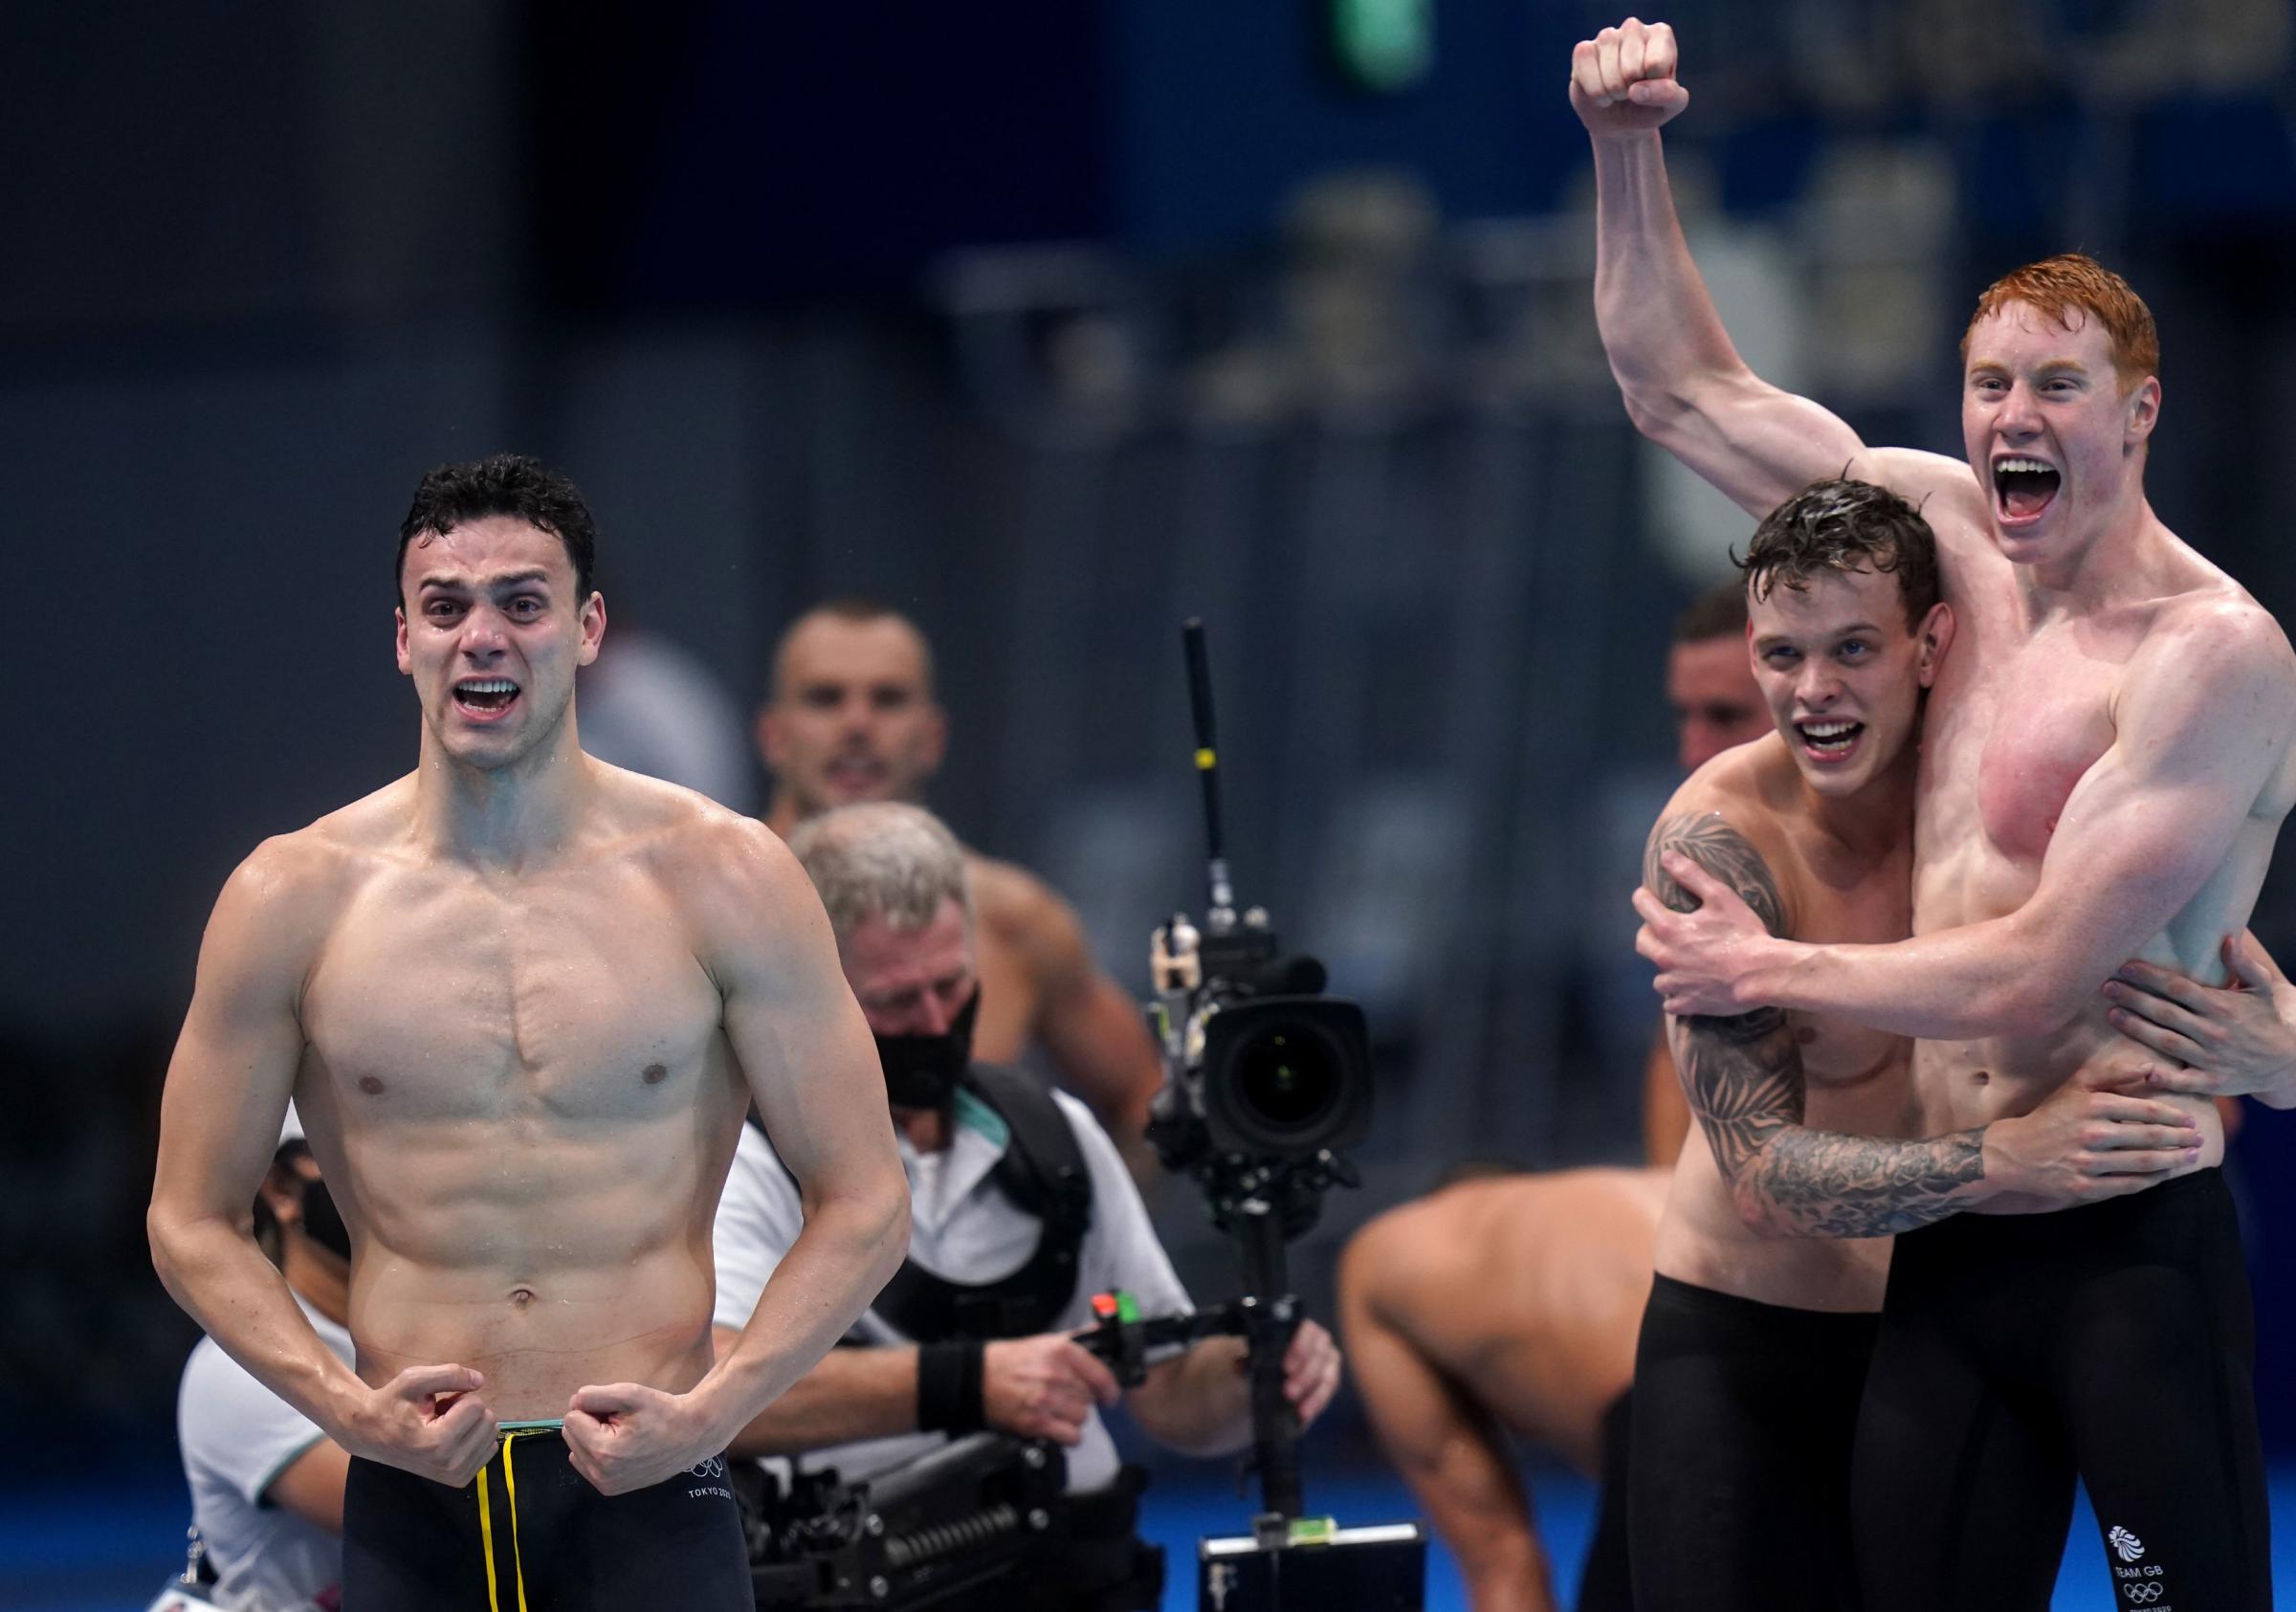 James Guy and his 4x200m freestyle teammates celebrate winning Olympic gold. Pictures by AP Photo and PA Wire